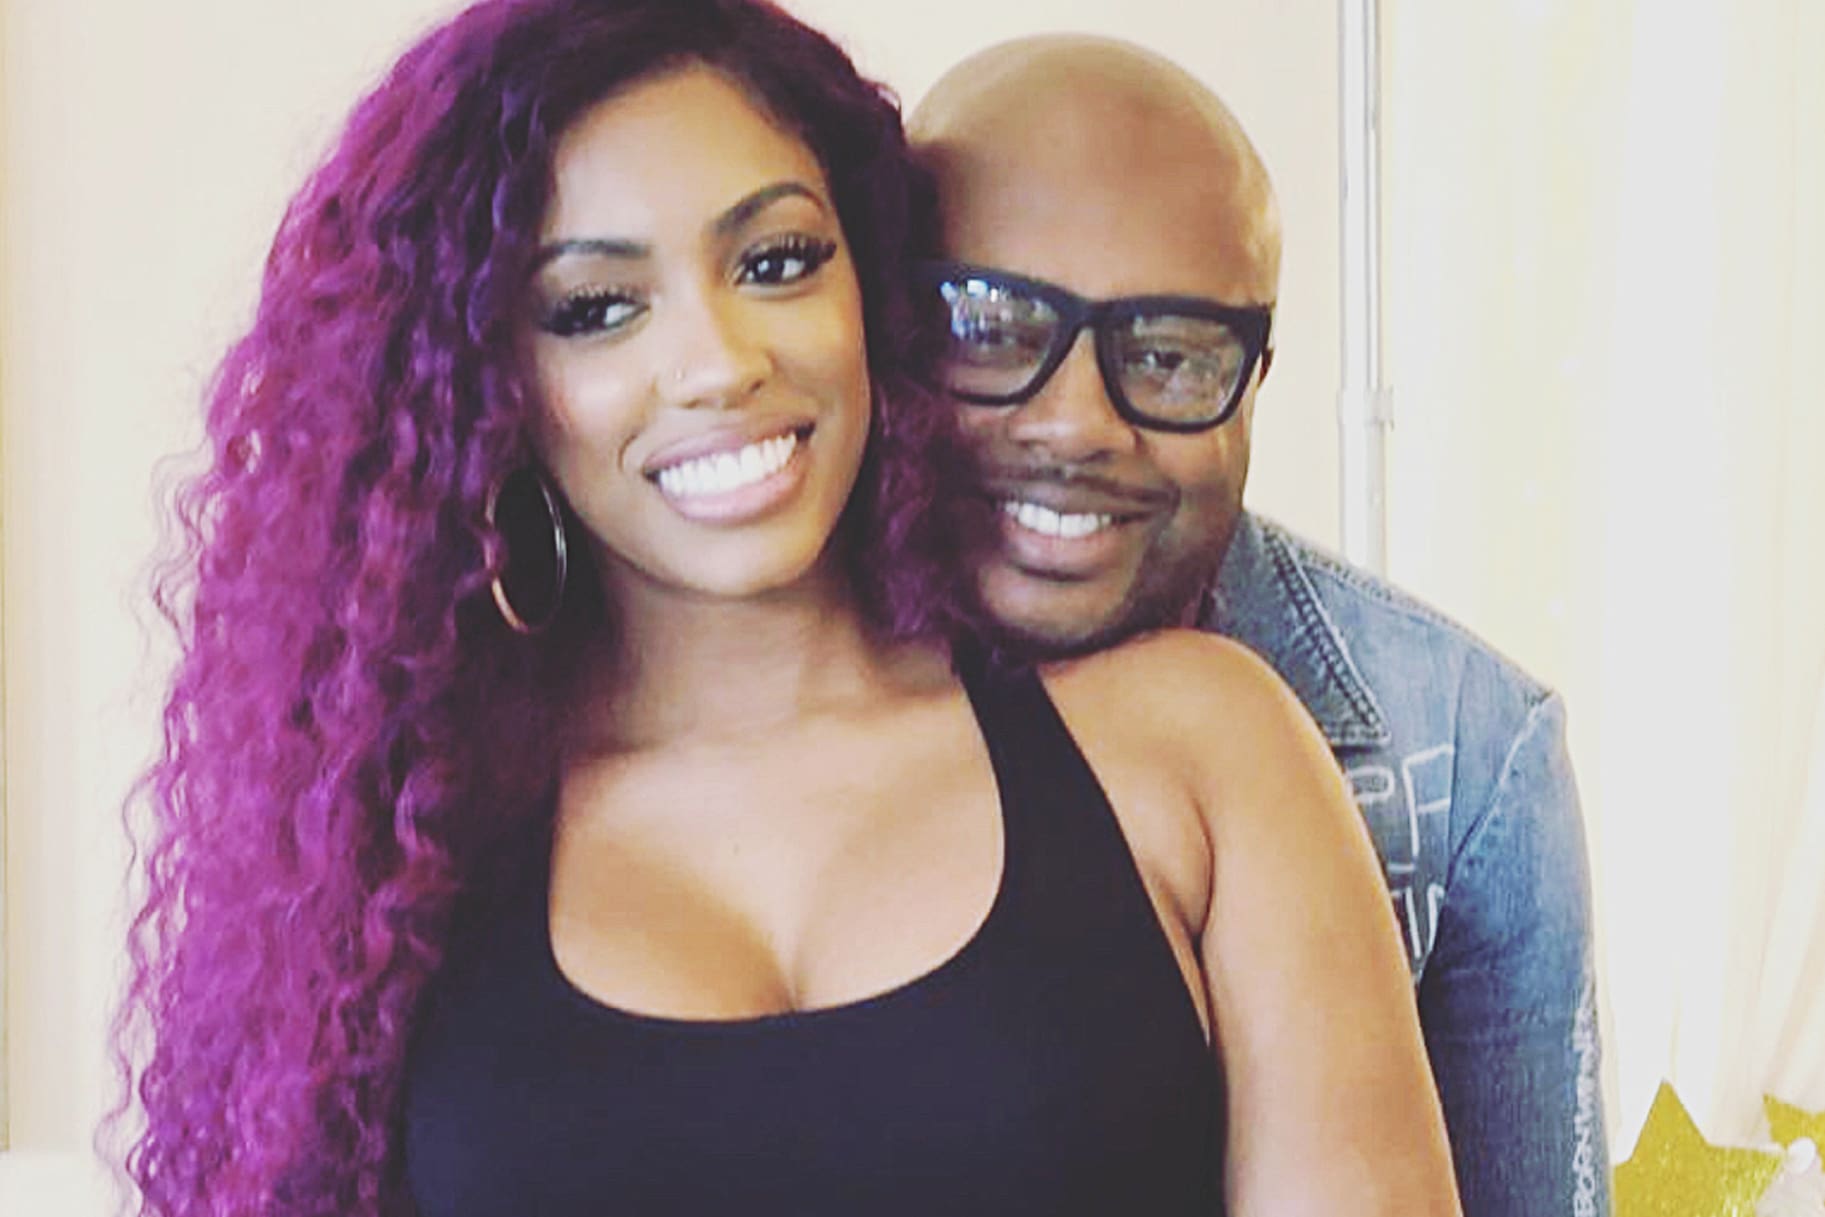 Porsha Williams & Dennis McKinley Are Finally Getting Ready To Welcome Baby PJ - See The Hospital Photo Here